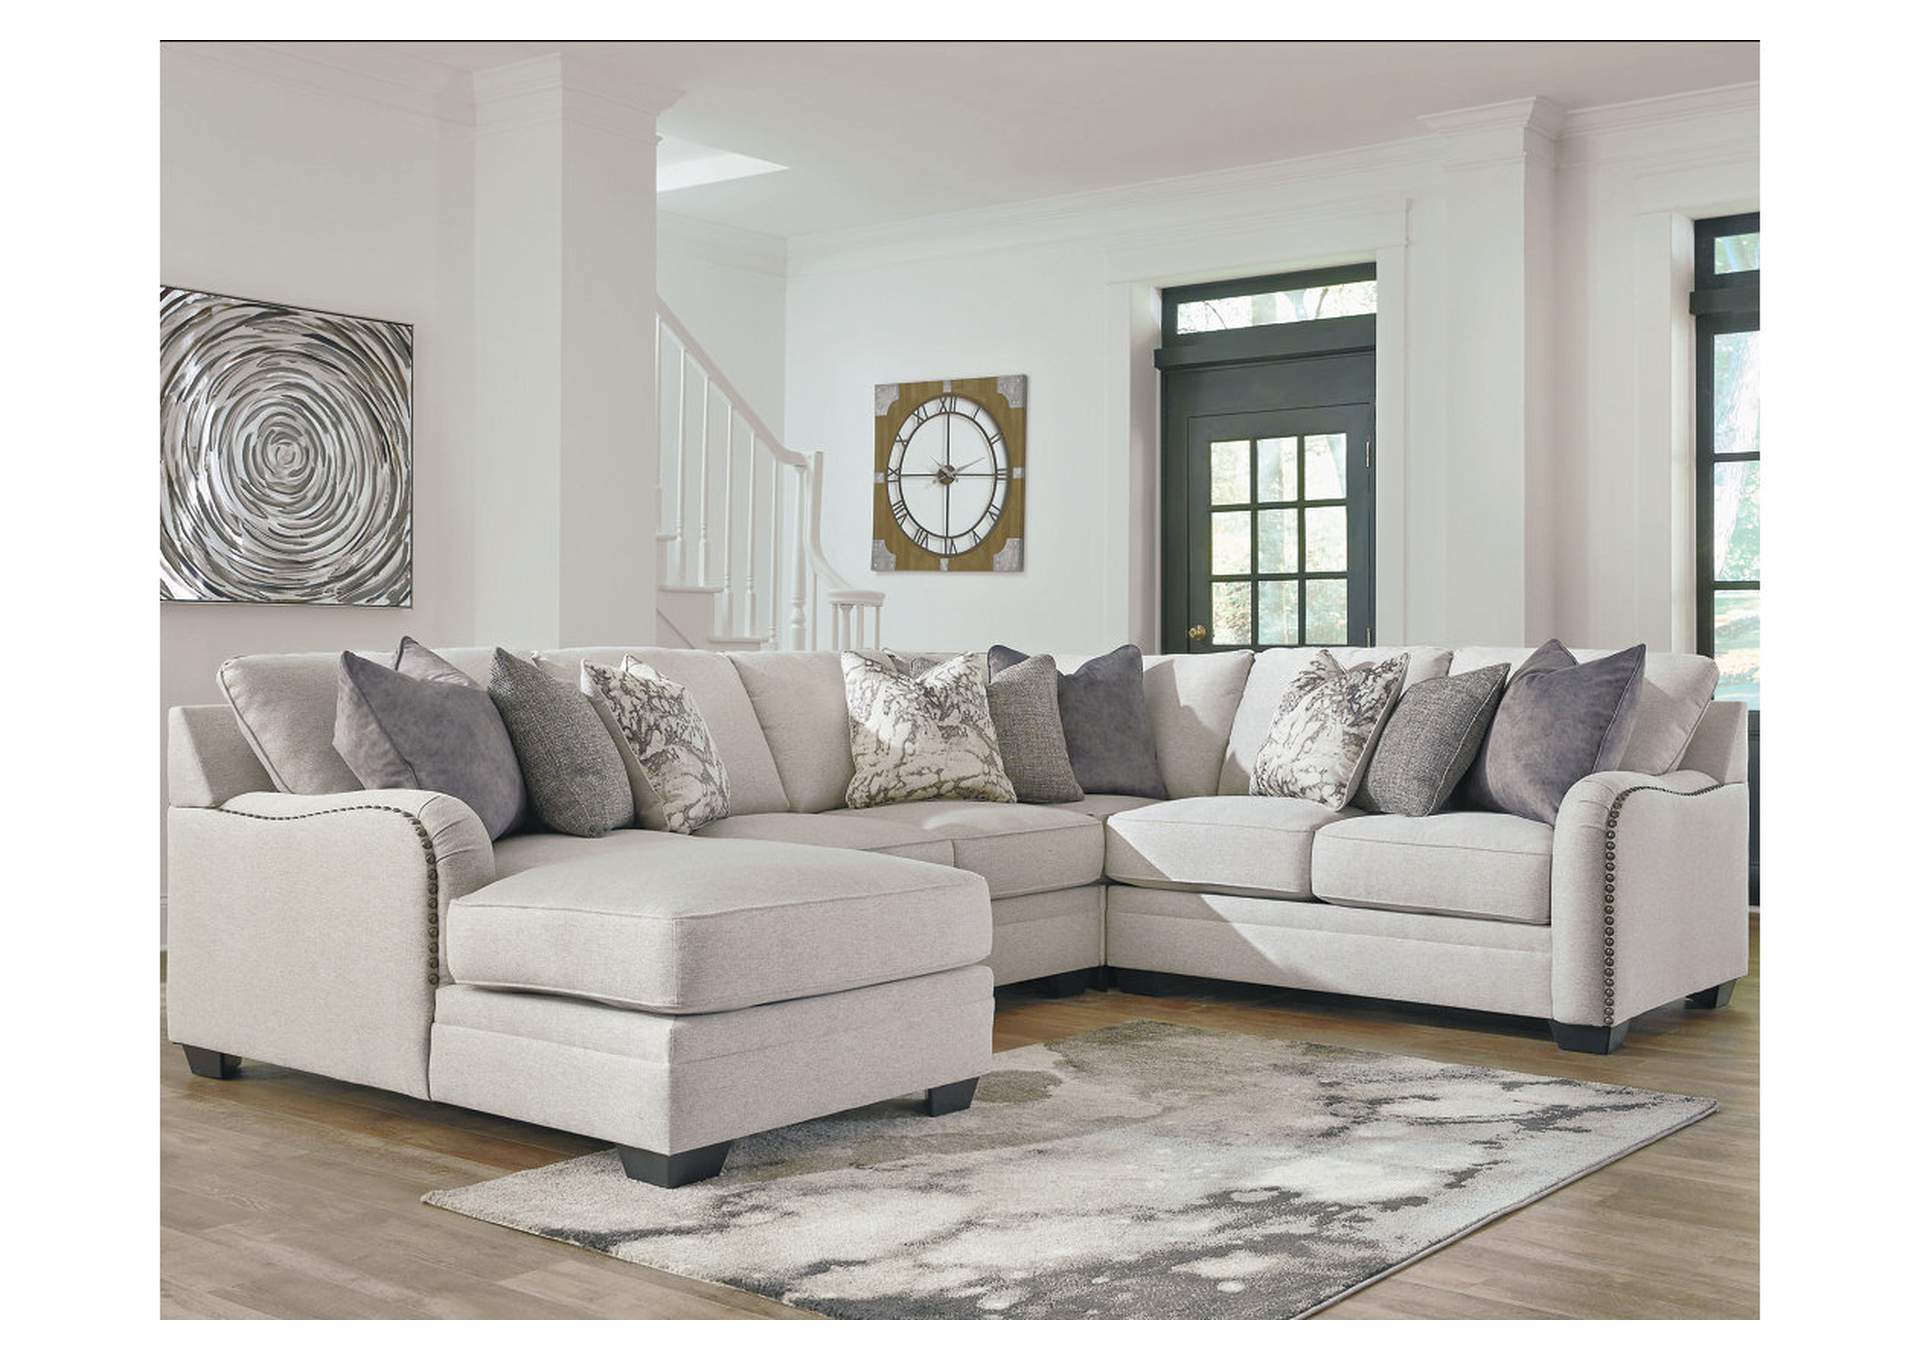 Dellara 4-Piece Sectional with Ottoman,Benchcraft